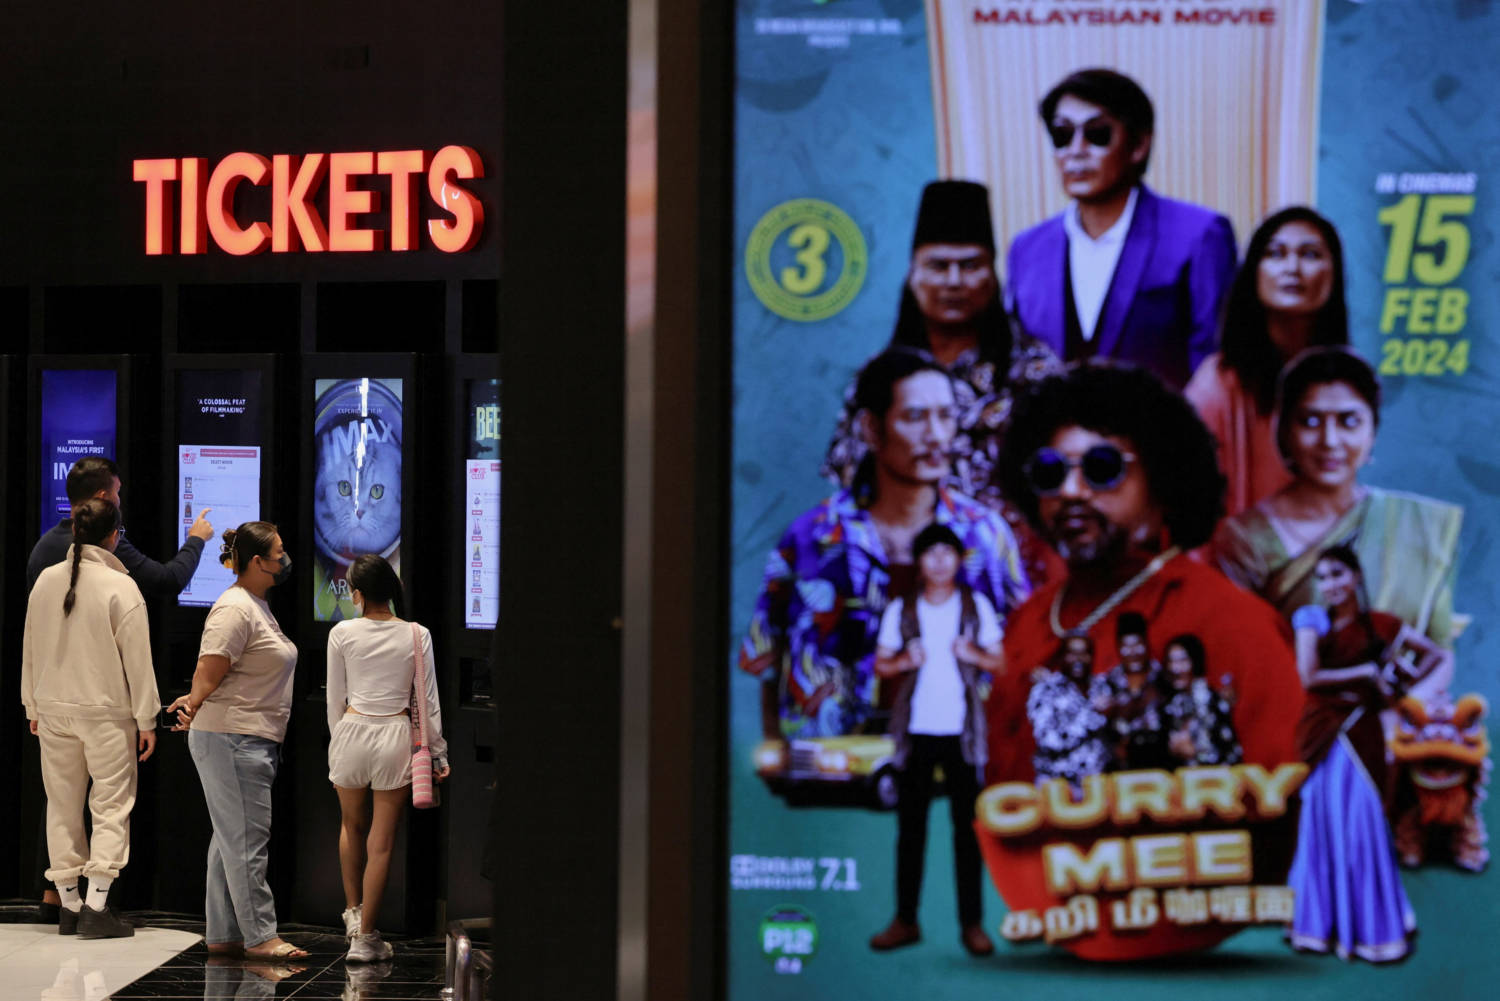 People Buy Movie Tickets From A Movie Ticket Kiosk At A Cinema In Kuala Lumpur